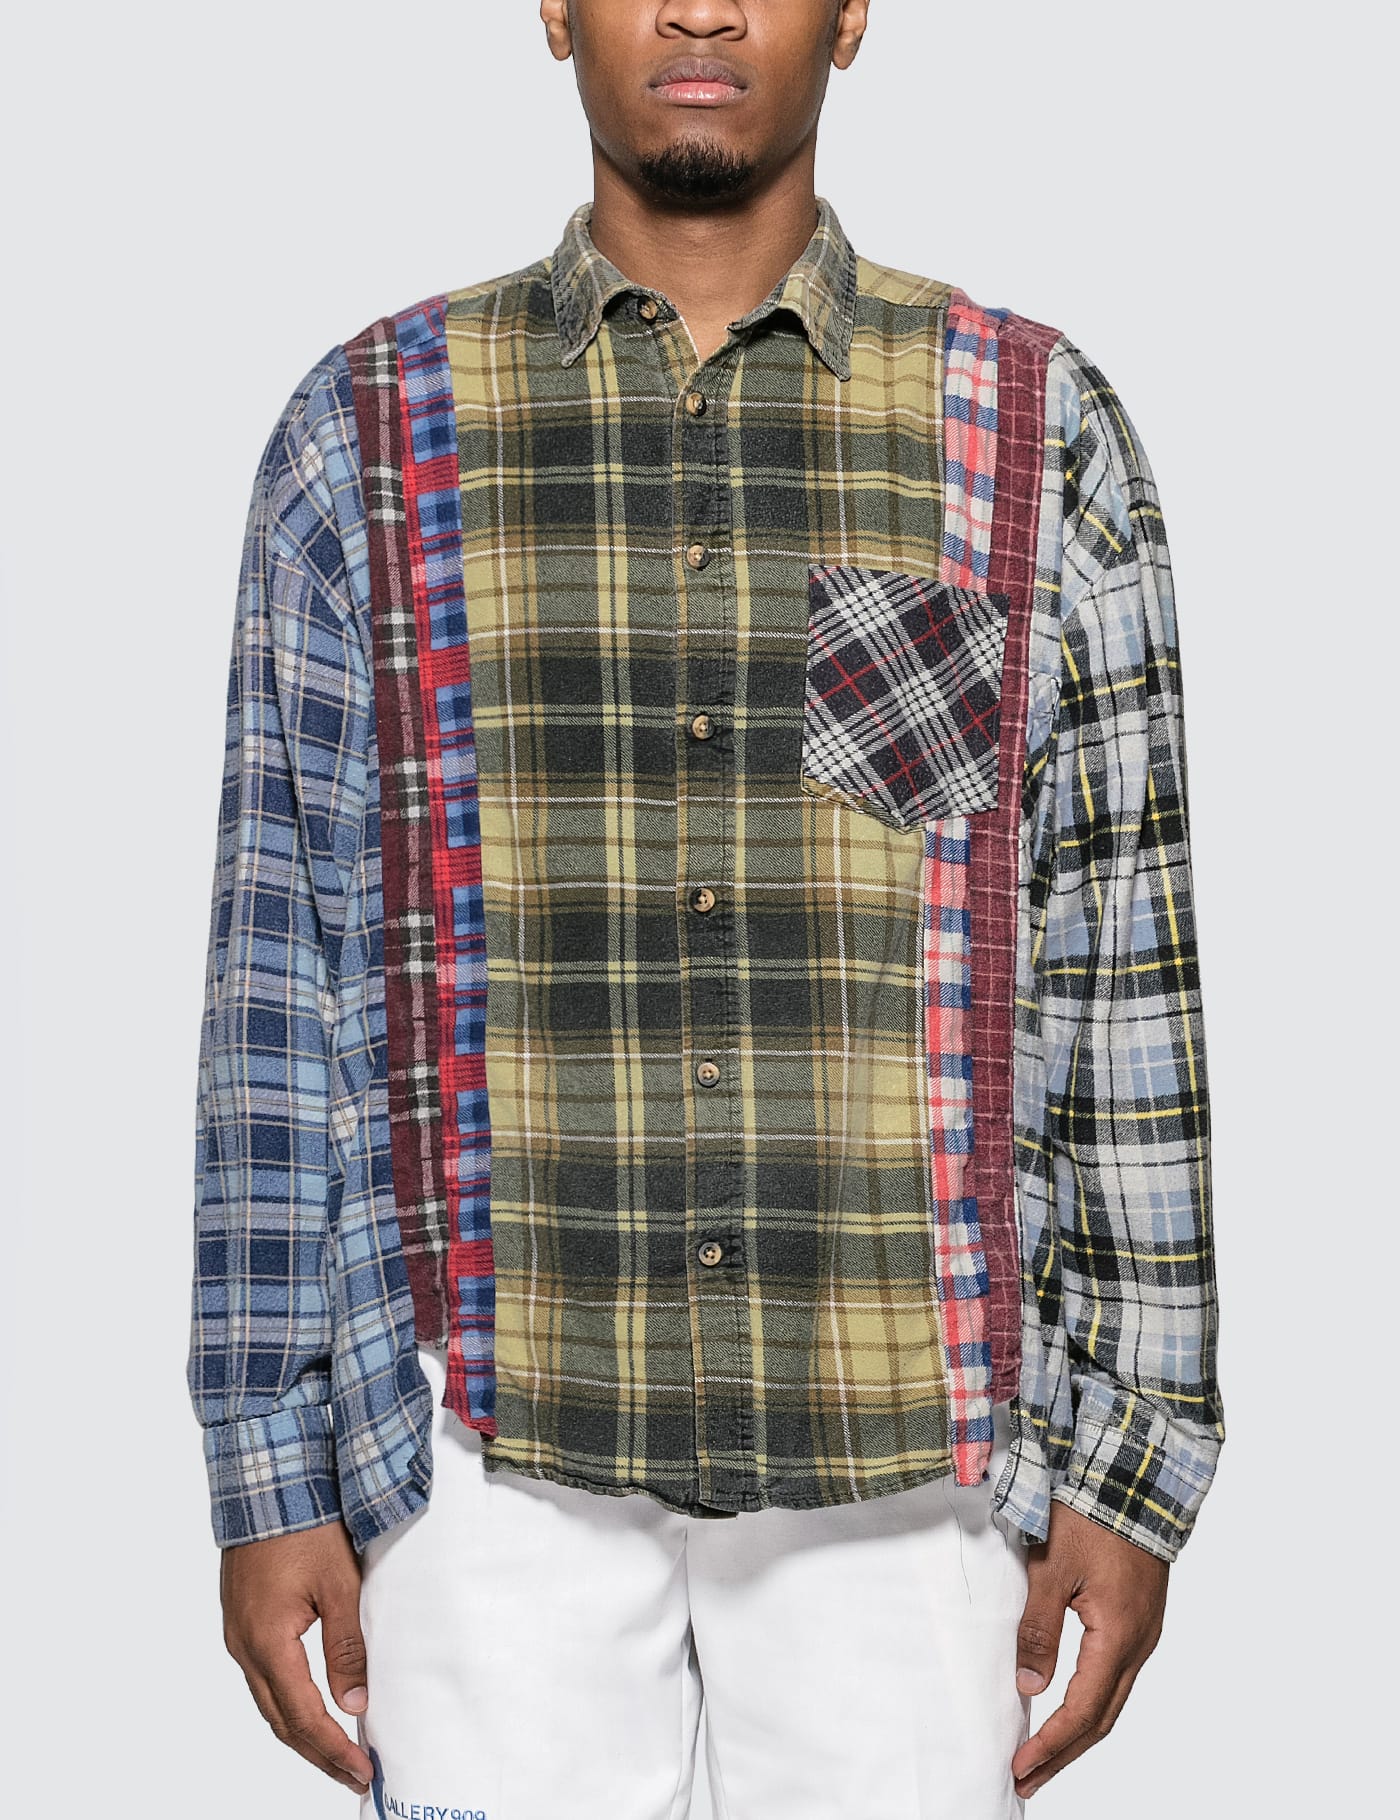 Needles - 7 Cuts Flannel Shirt | HBX - Globally Curated Fashion